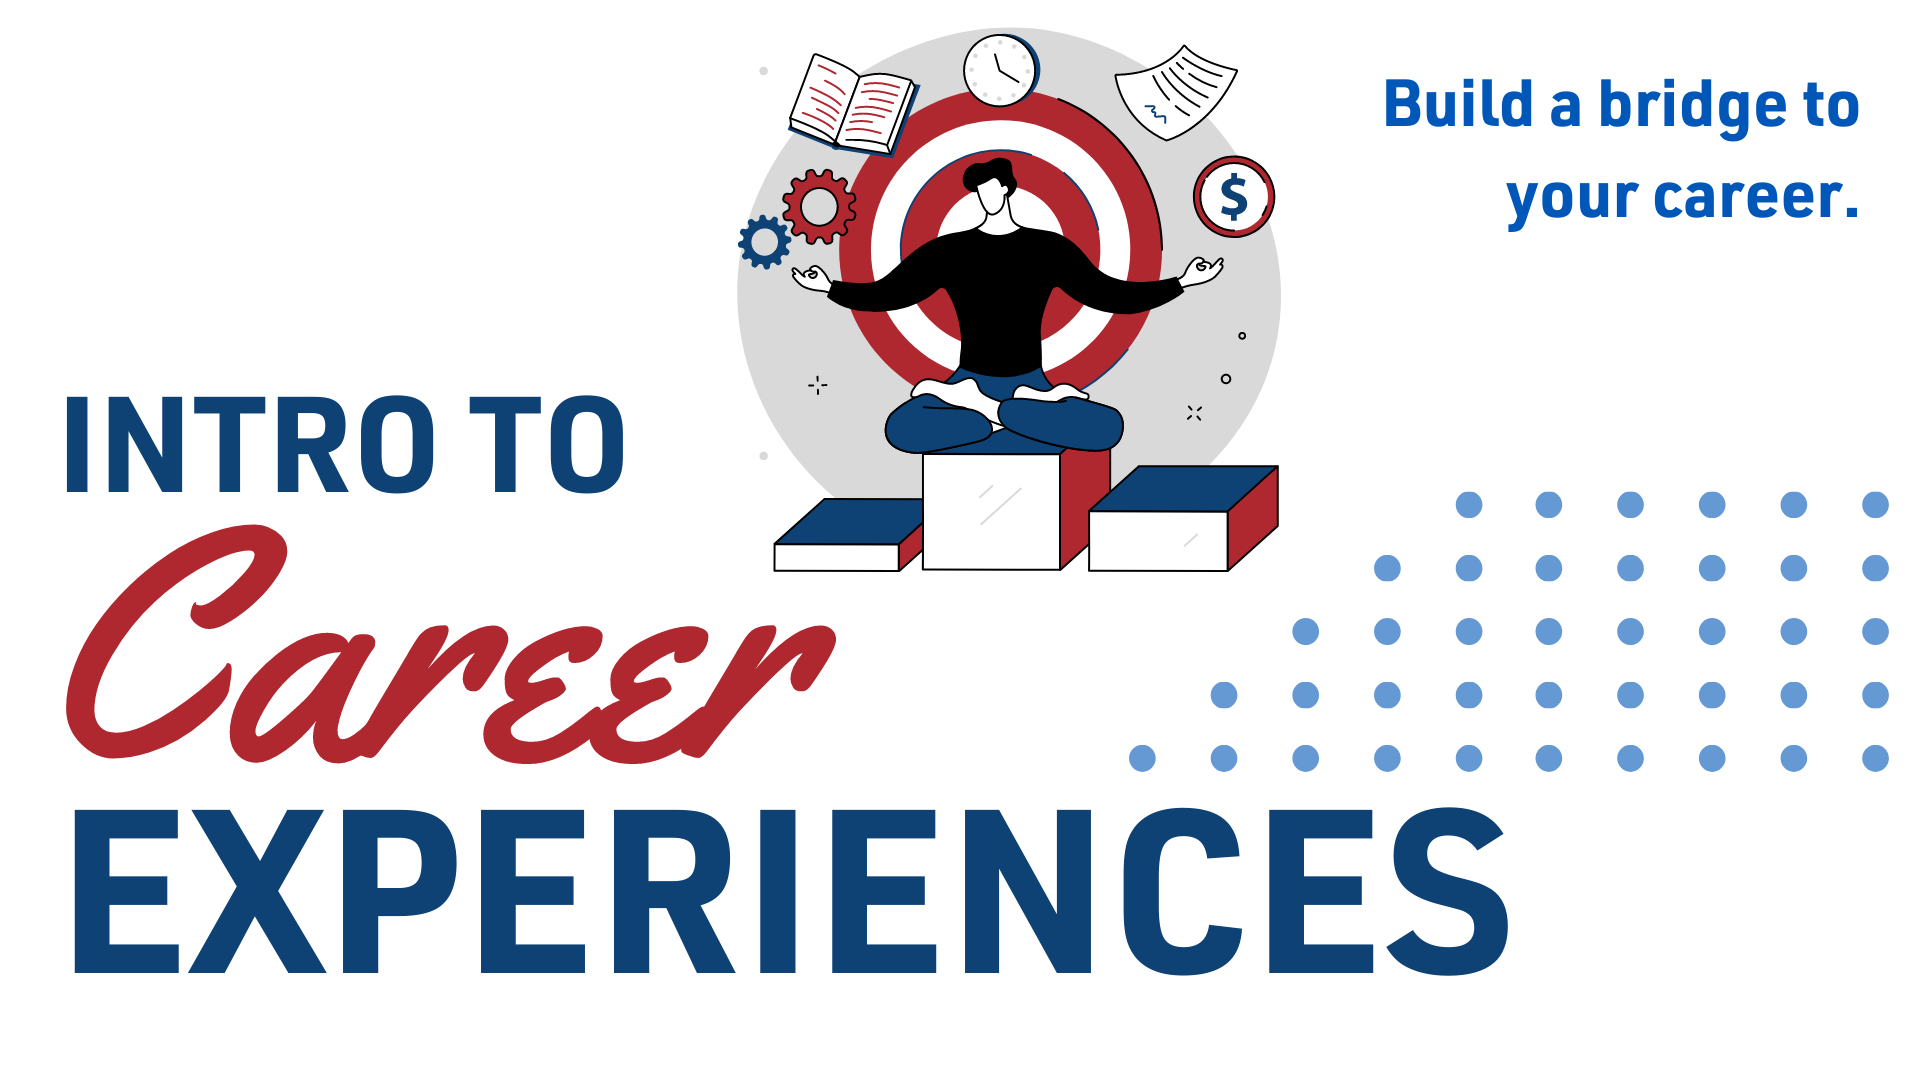 Introduction to Career Experiences